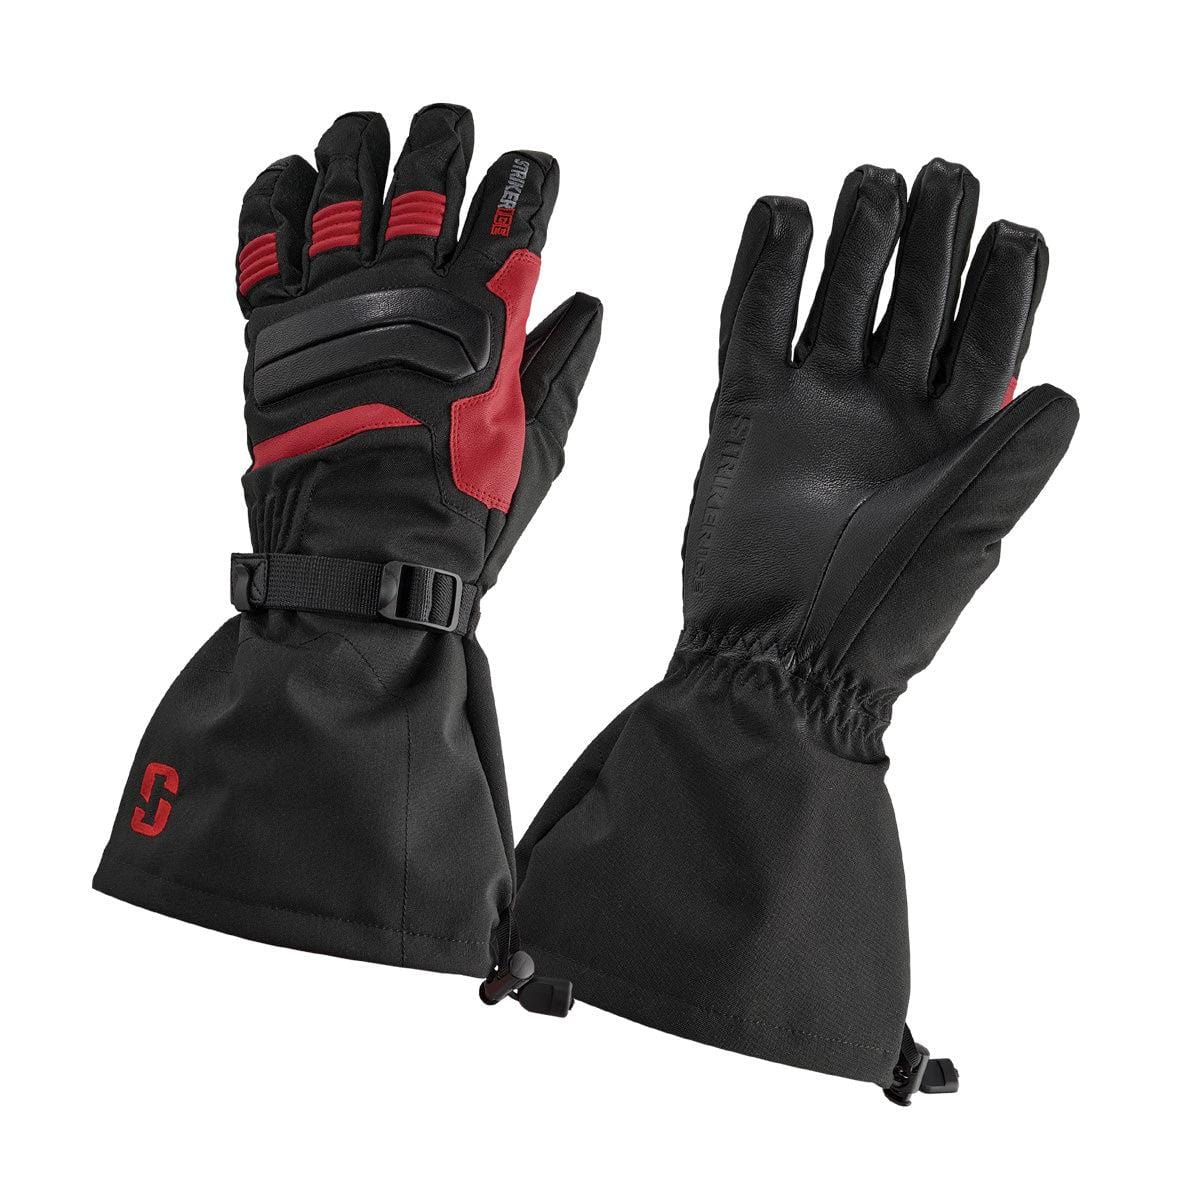 Blade Runner Leather Gloves With or Without Knuckle Protection